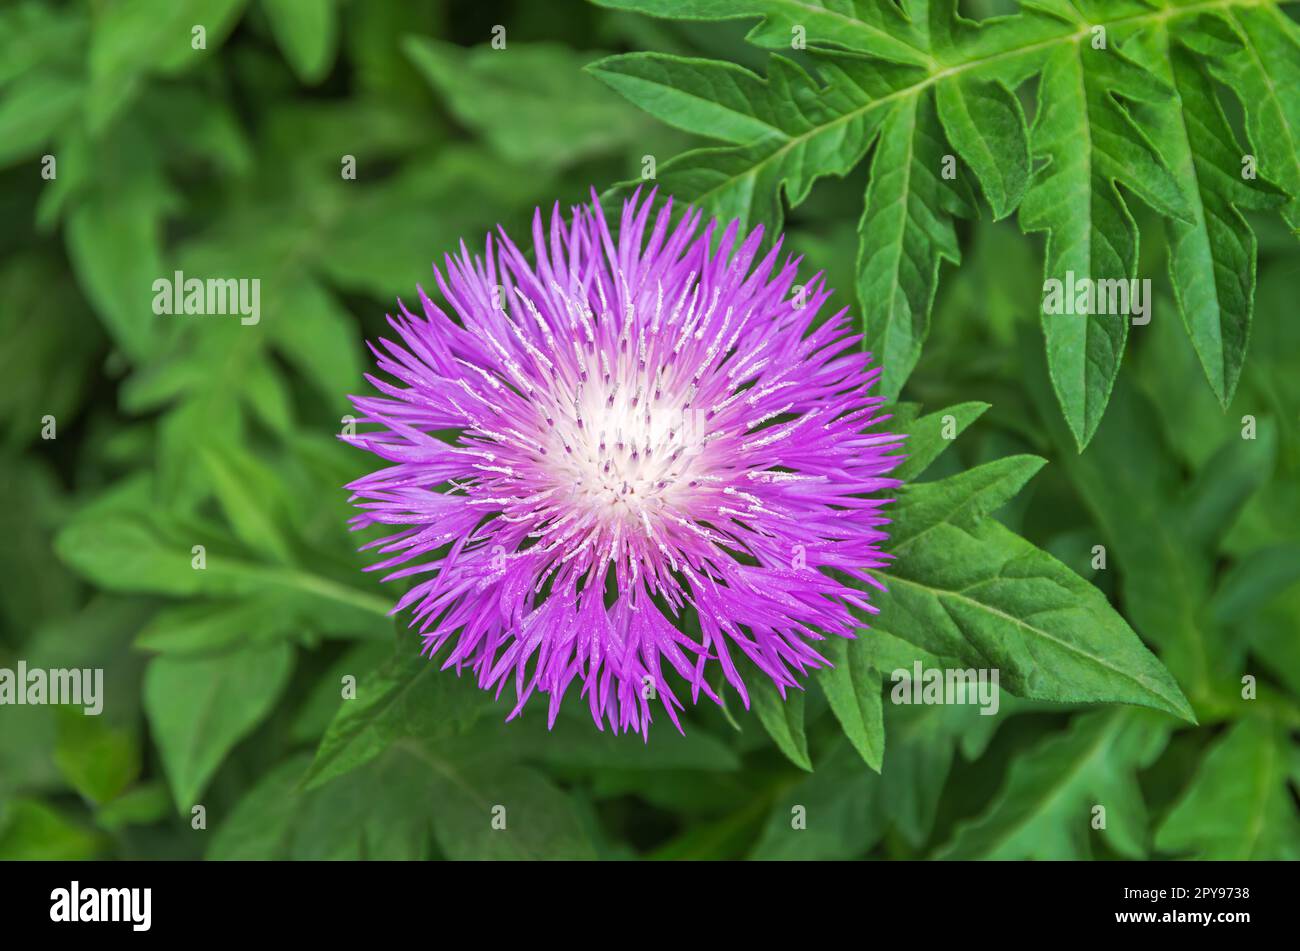 Rhaponticum carthamoides. Leuzea carthamoides. Maral root. Herbaceous perennial plant from the family Asteraceae. Medicinal plant and flowers Stock Photo